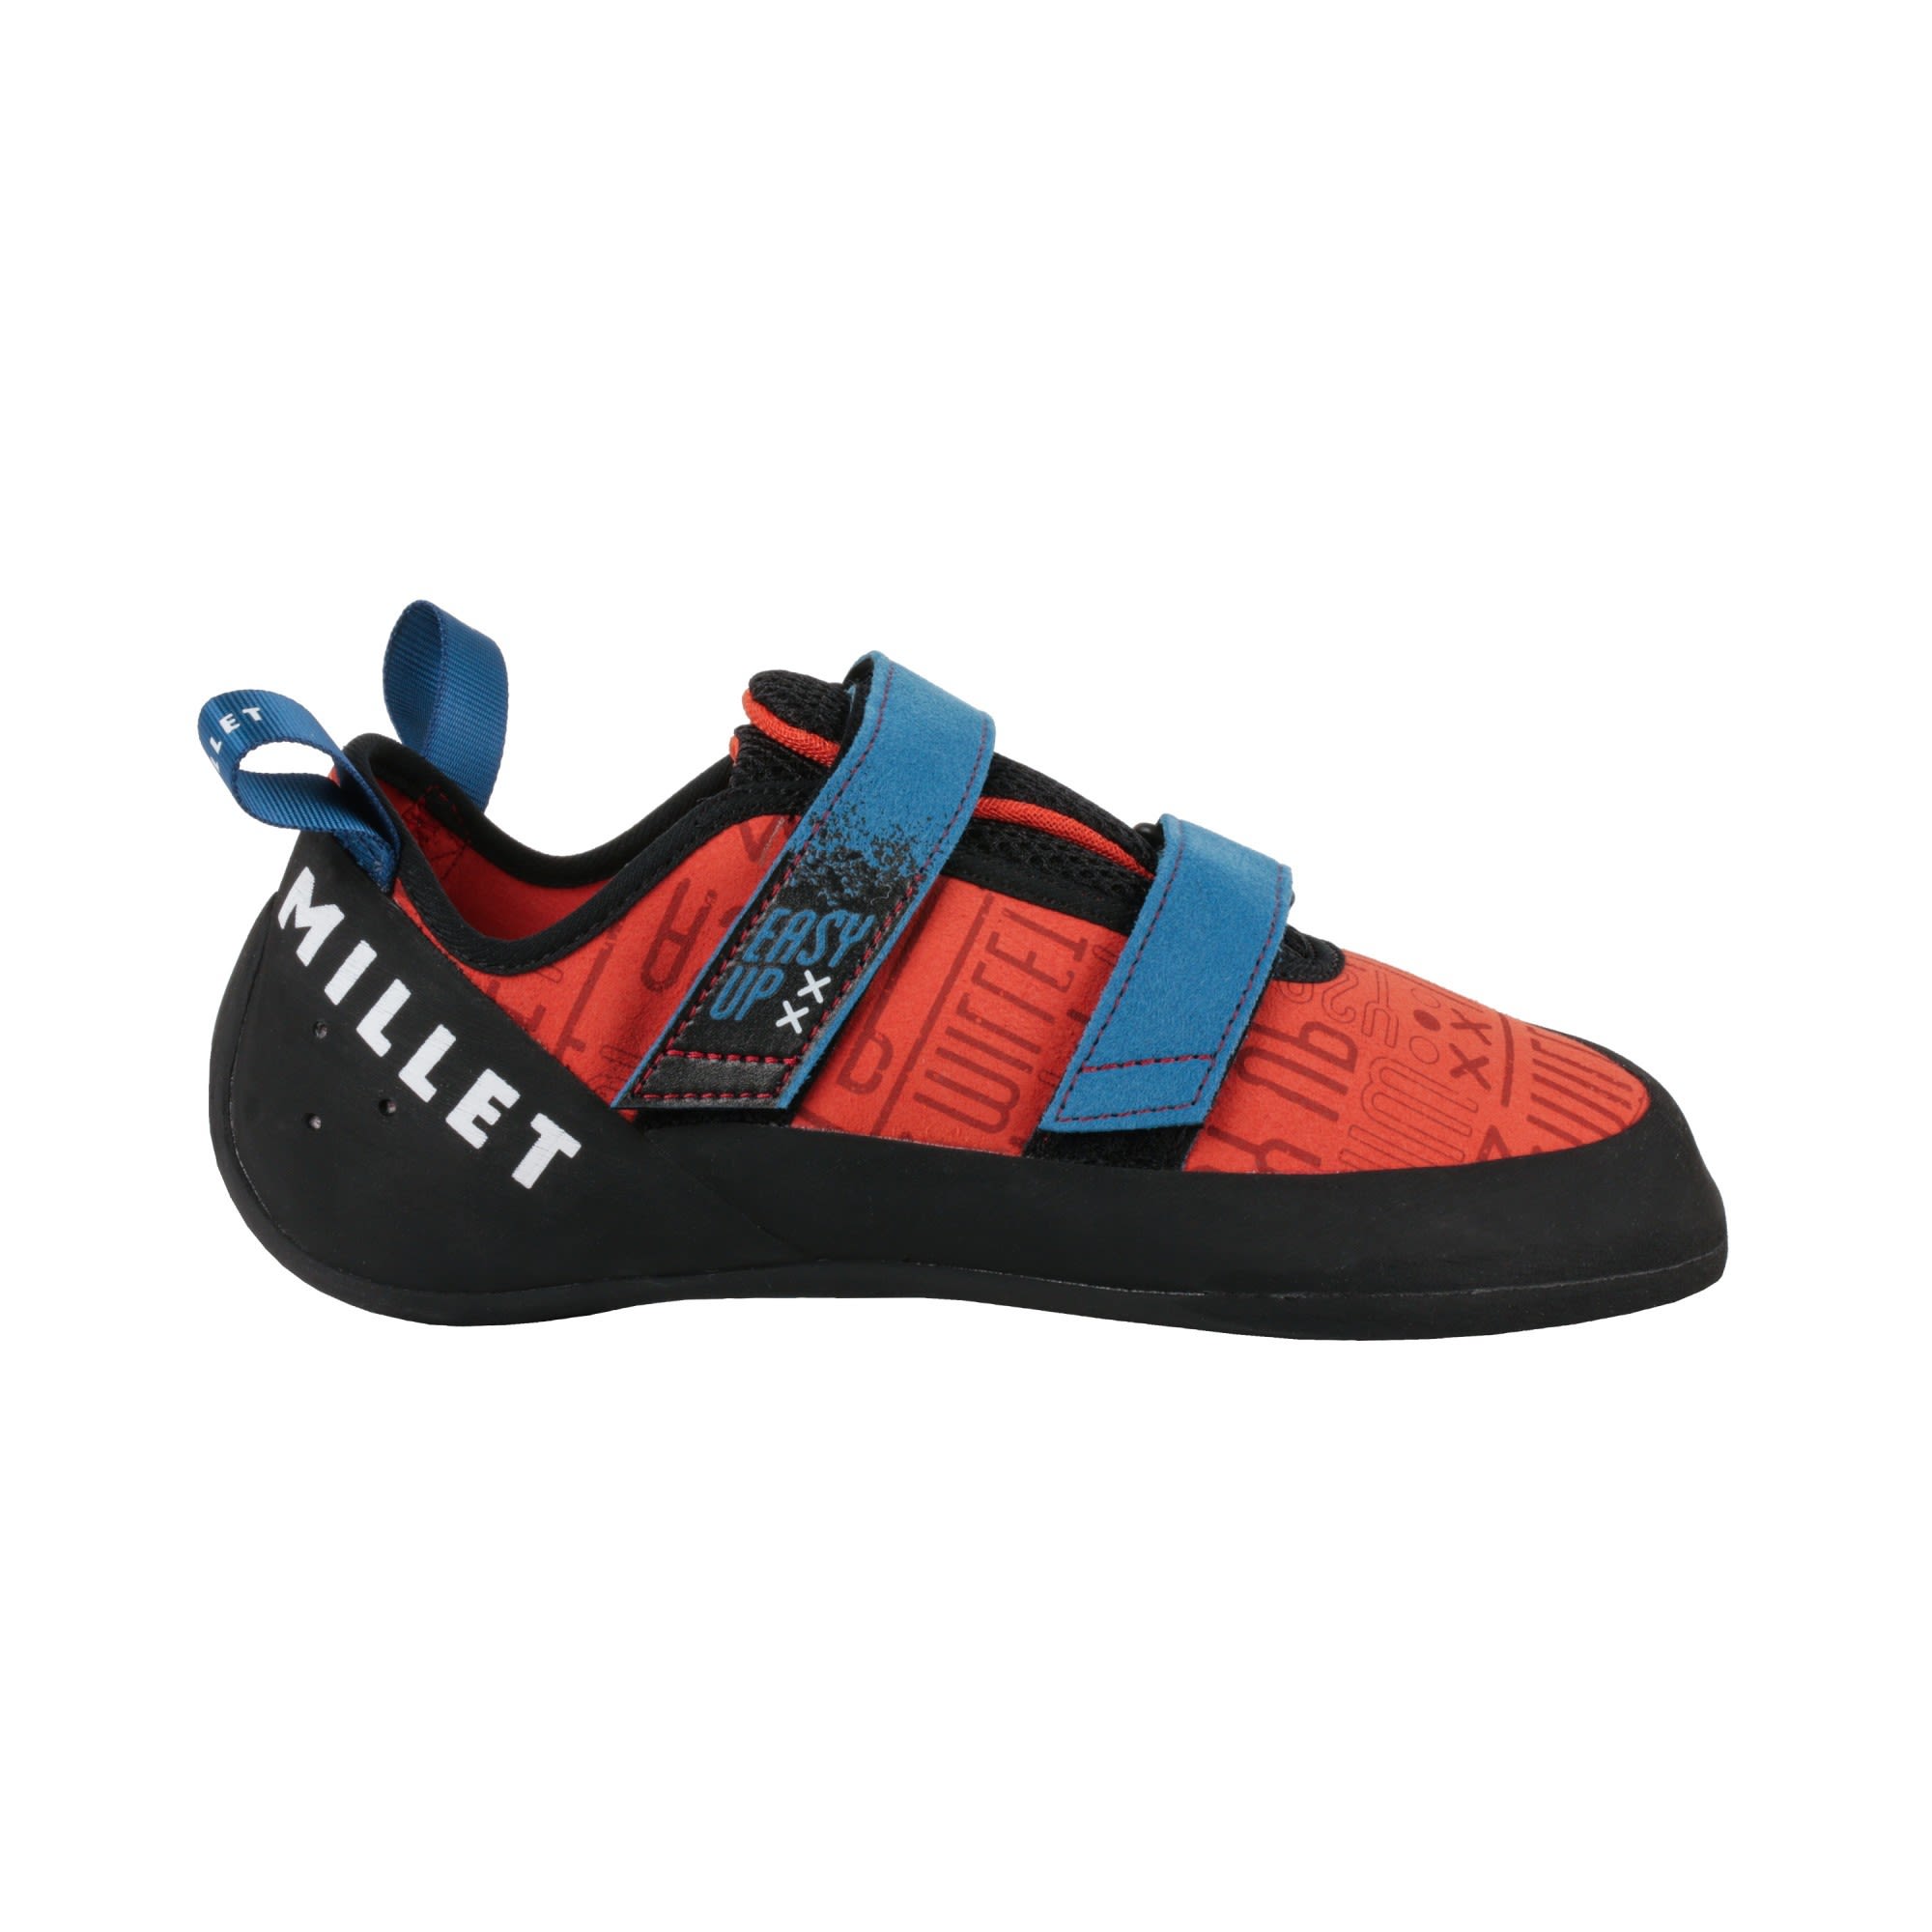 Millet Easy Up 5C Rot- Male Kletterschuhe- Grsse EU 39 - Farbe Chili unter Millet